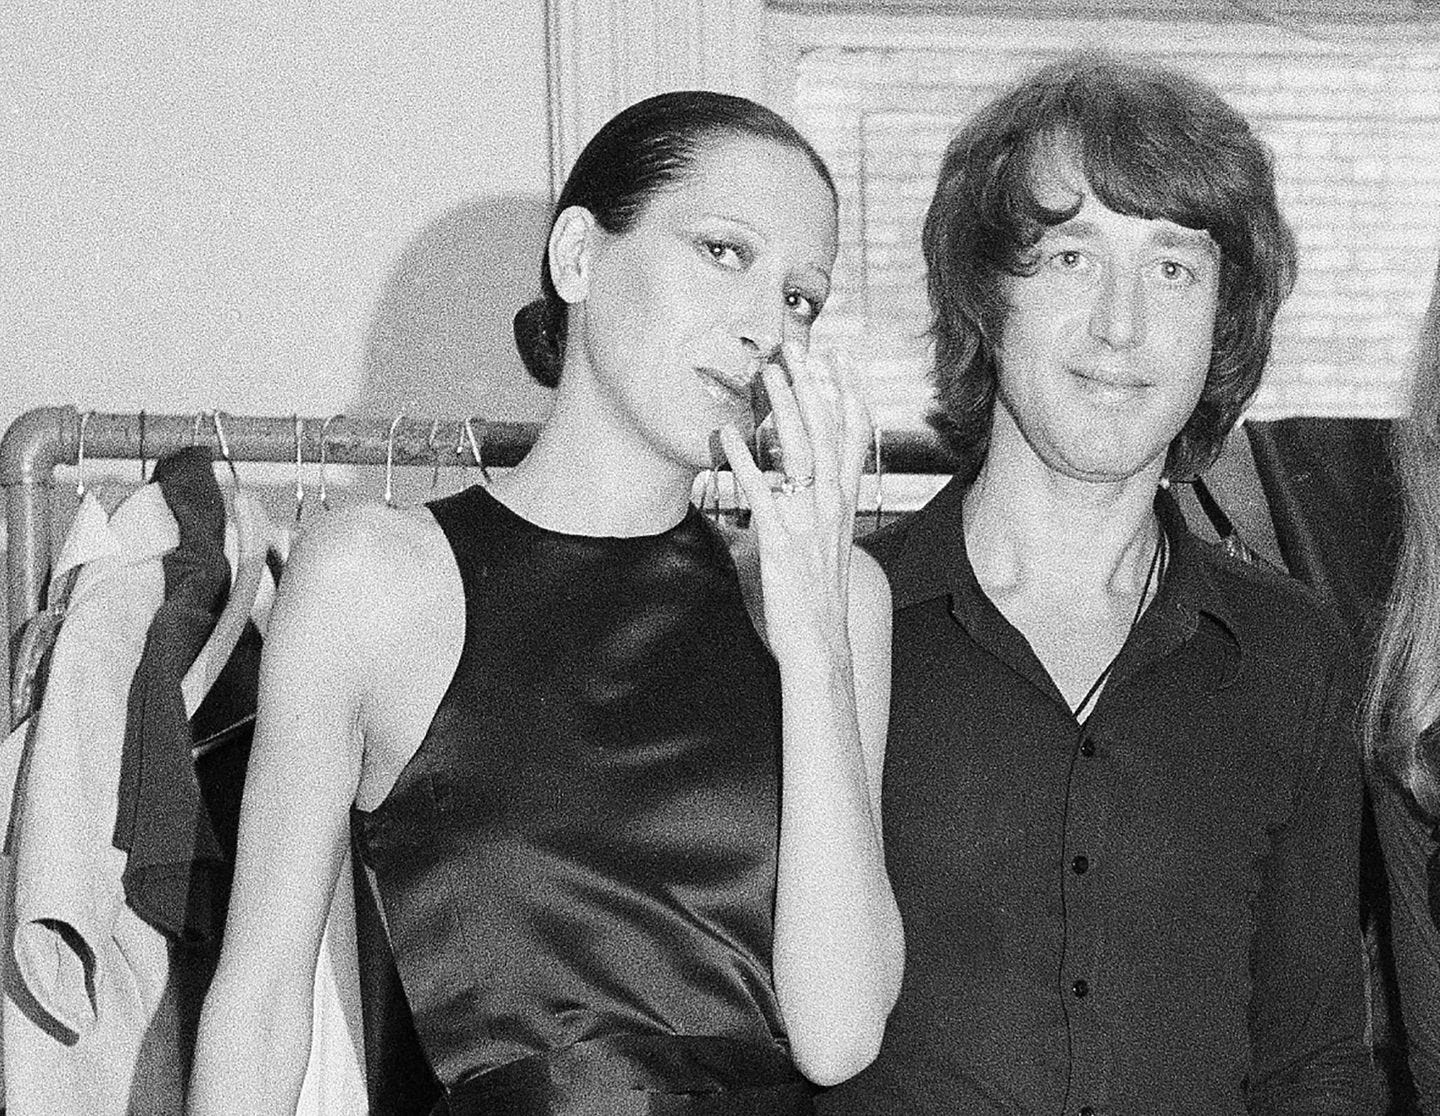 Elsa Peretti, left, posed with designer Halston after a fashion show in New York on June 15, 1970.